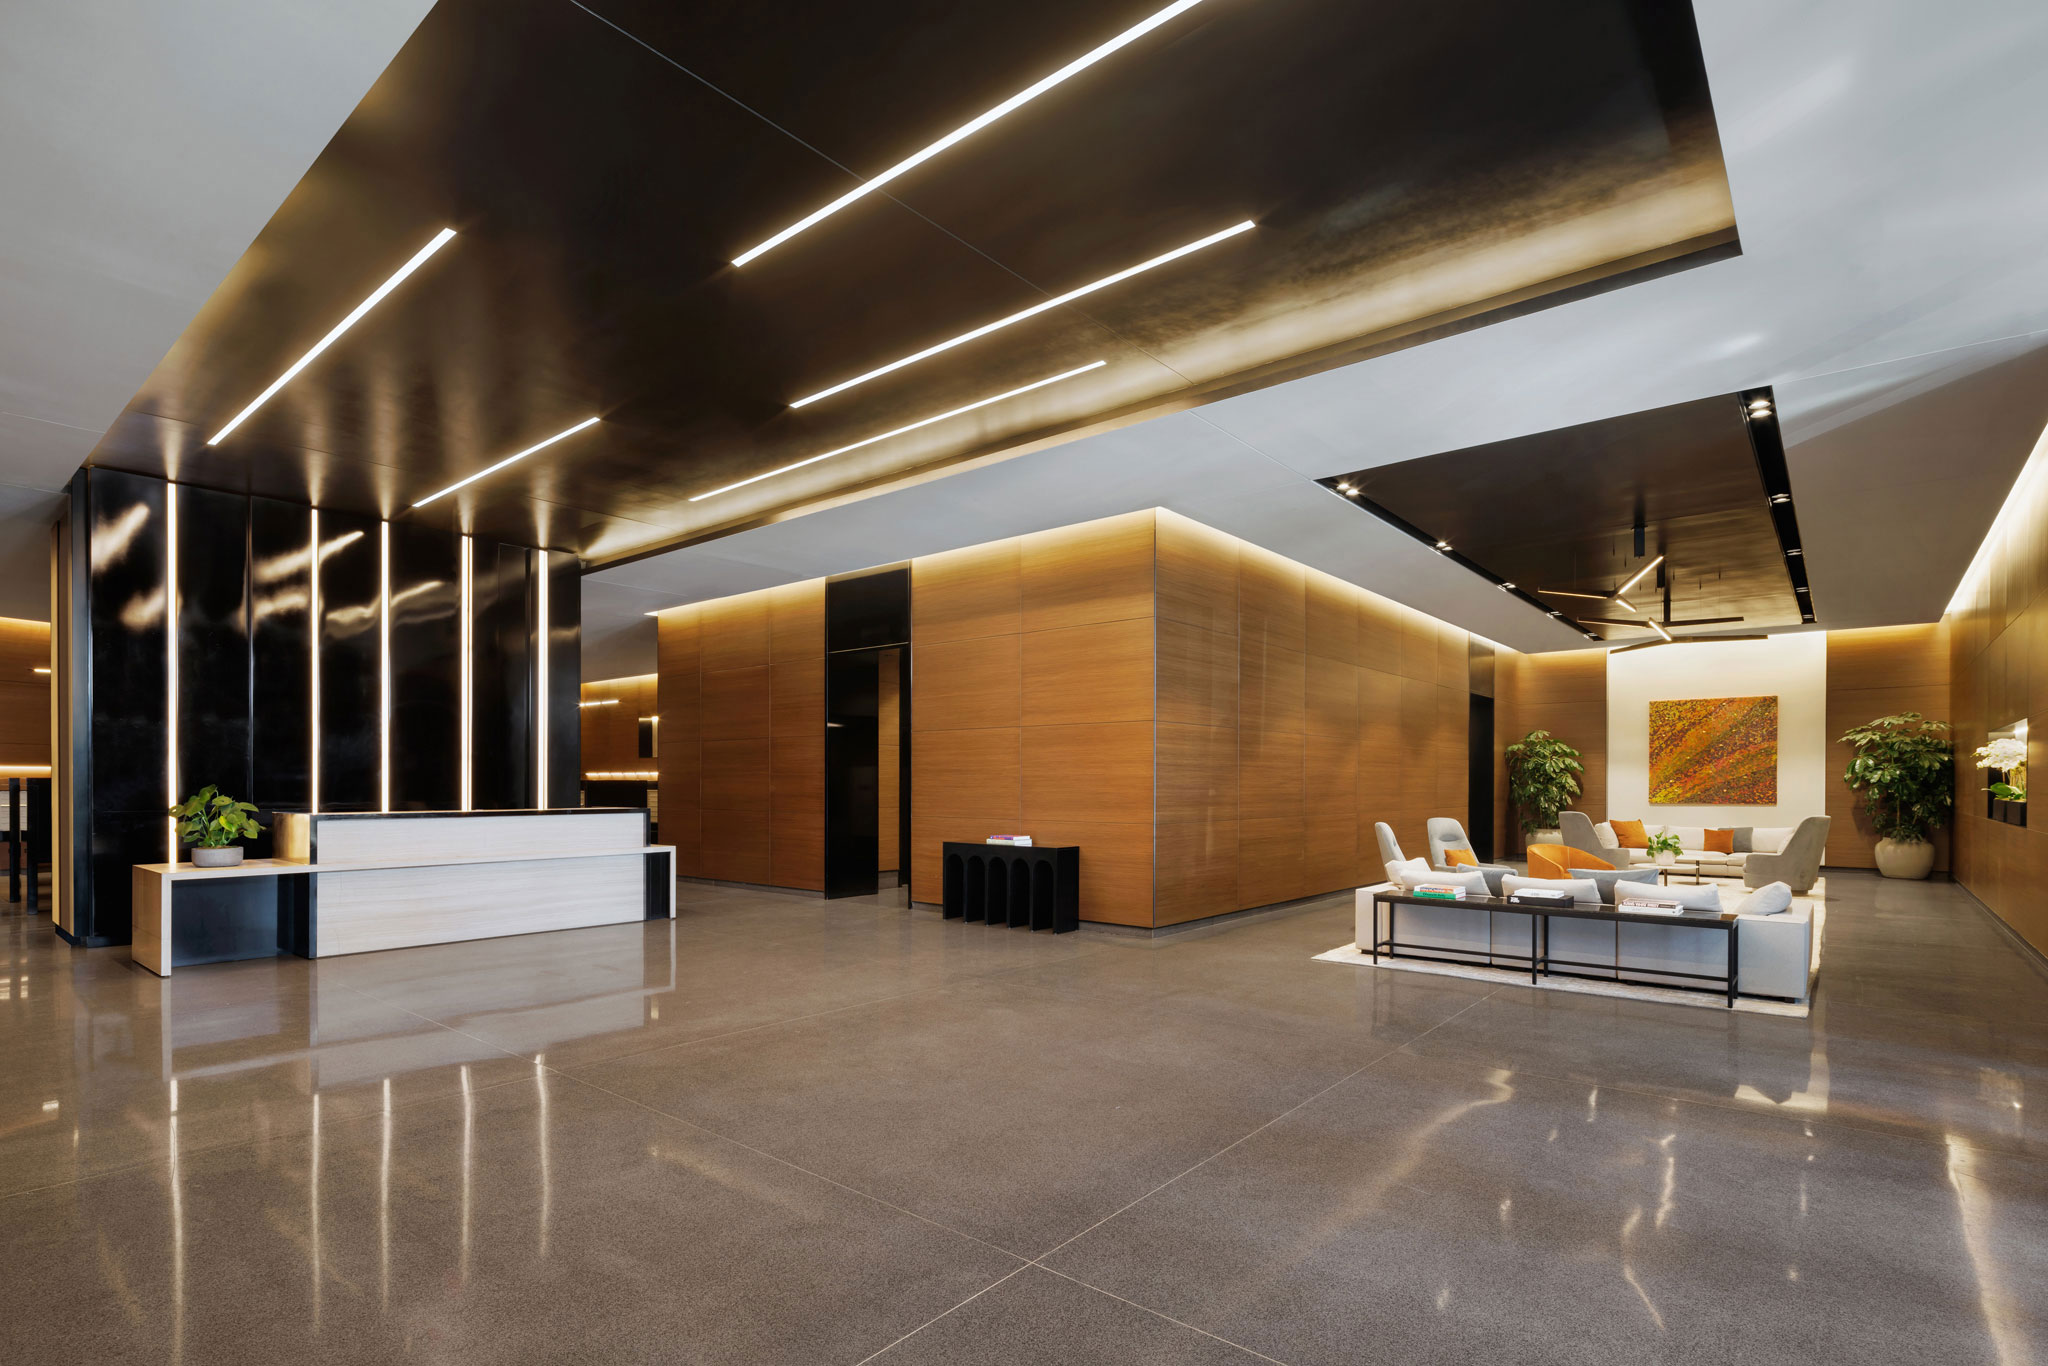 Brooklyn Crossing residential lobby with a concierge desk and bright seating area for guests